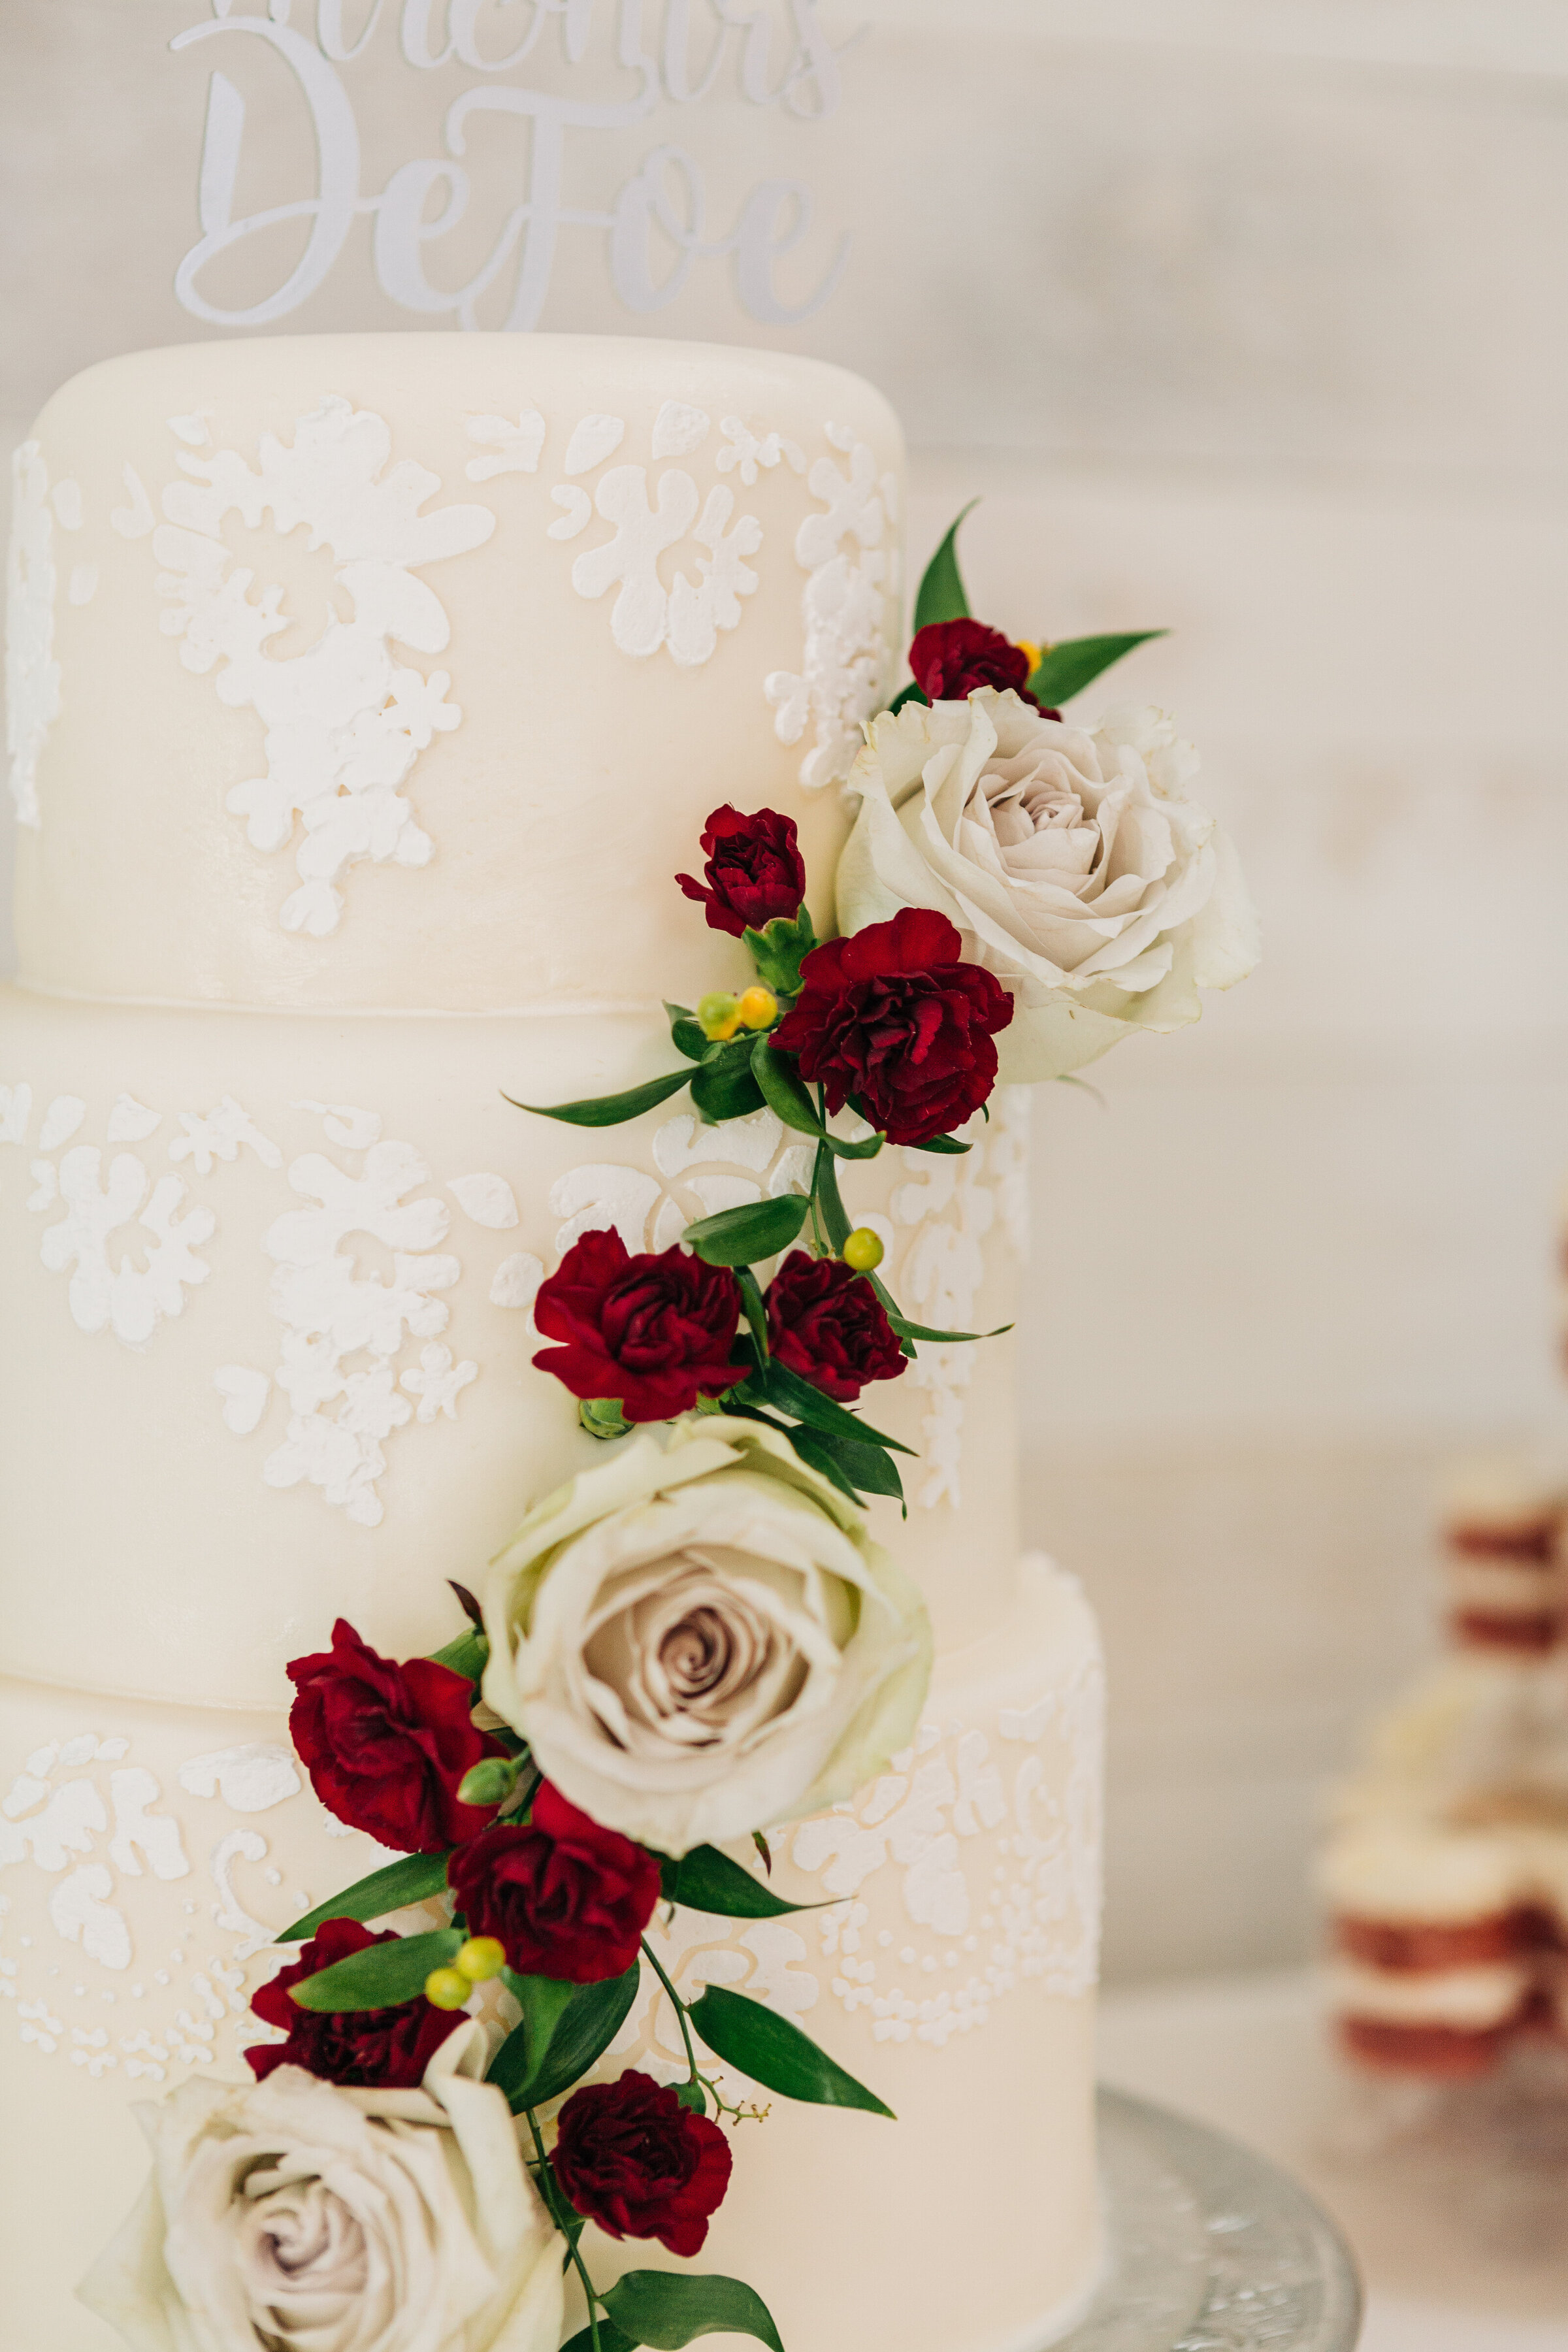 Roses and carnations on wedding cake